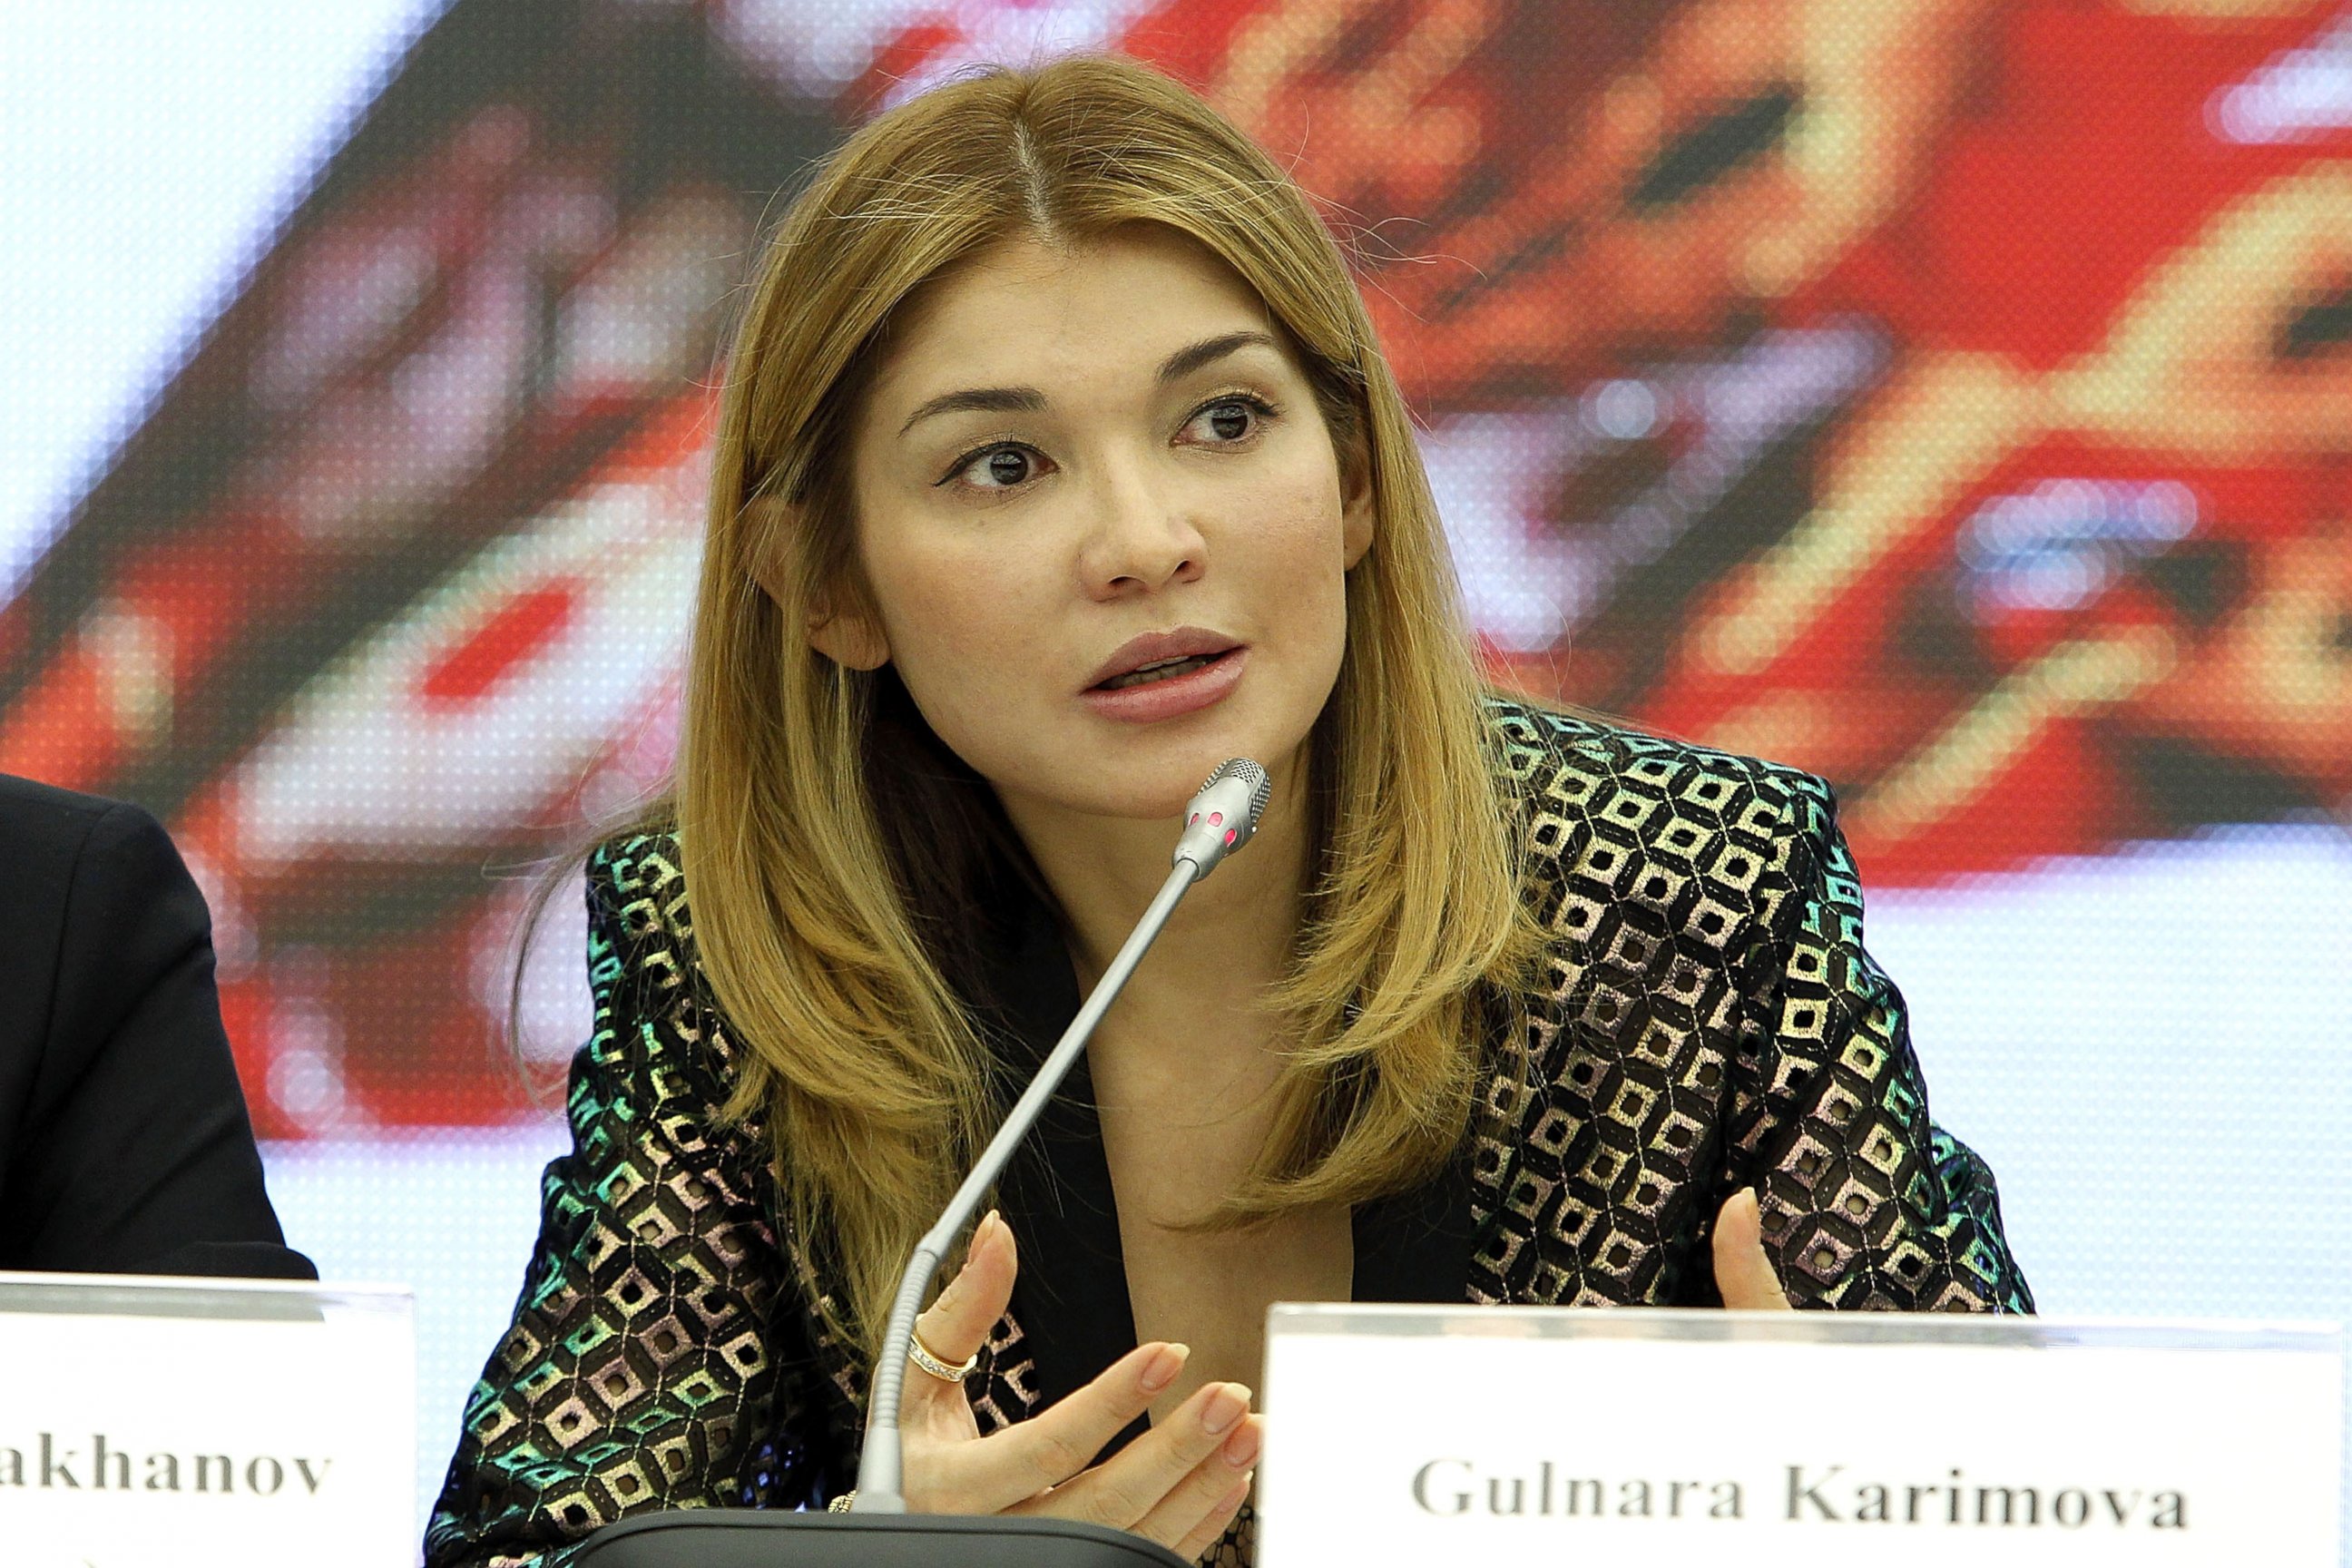 PHOTO: H.E.Dr. Gulnara Karimova Chairwoman of the Fund Forum Board of Trustees attends a press conference during Style.Uz Art Week at The Youth Art Palace on Oct. 22, 2013 in Tashkent, Uzbekistan.  